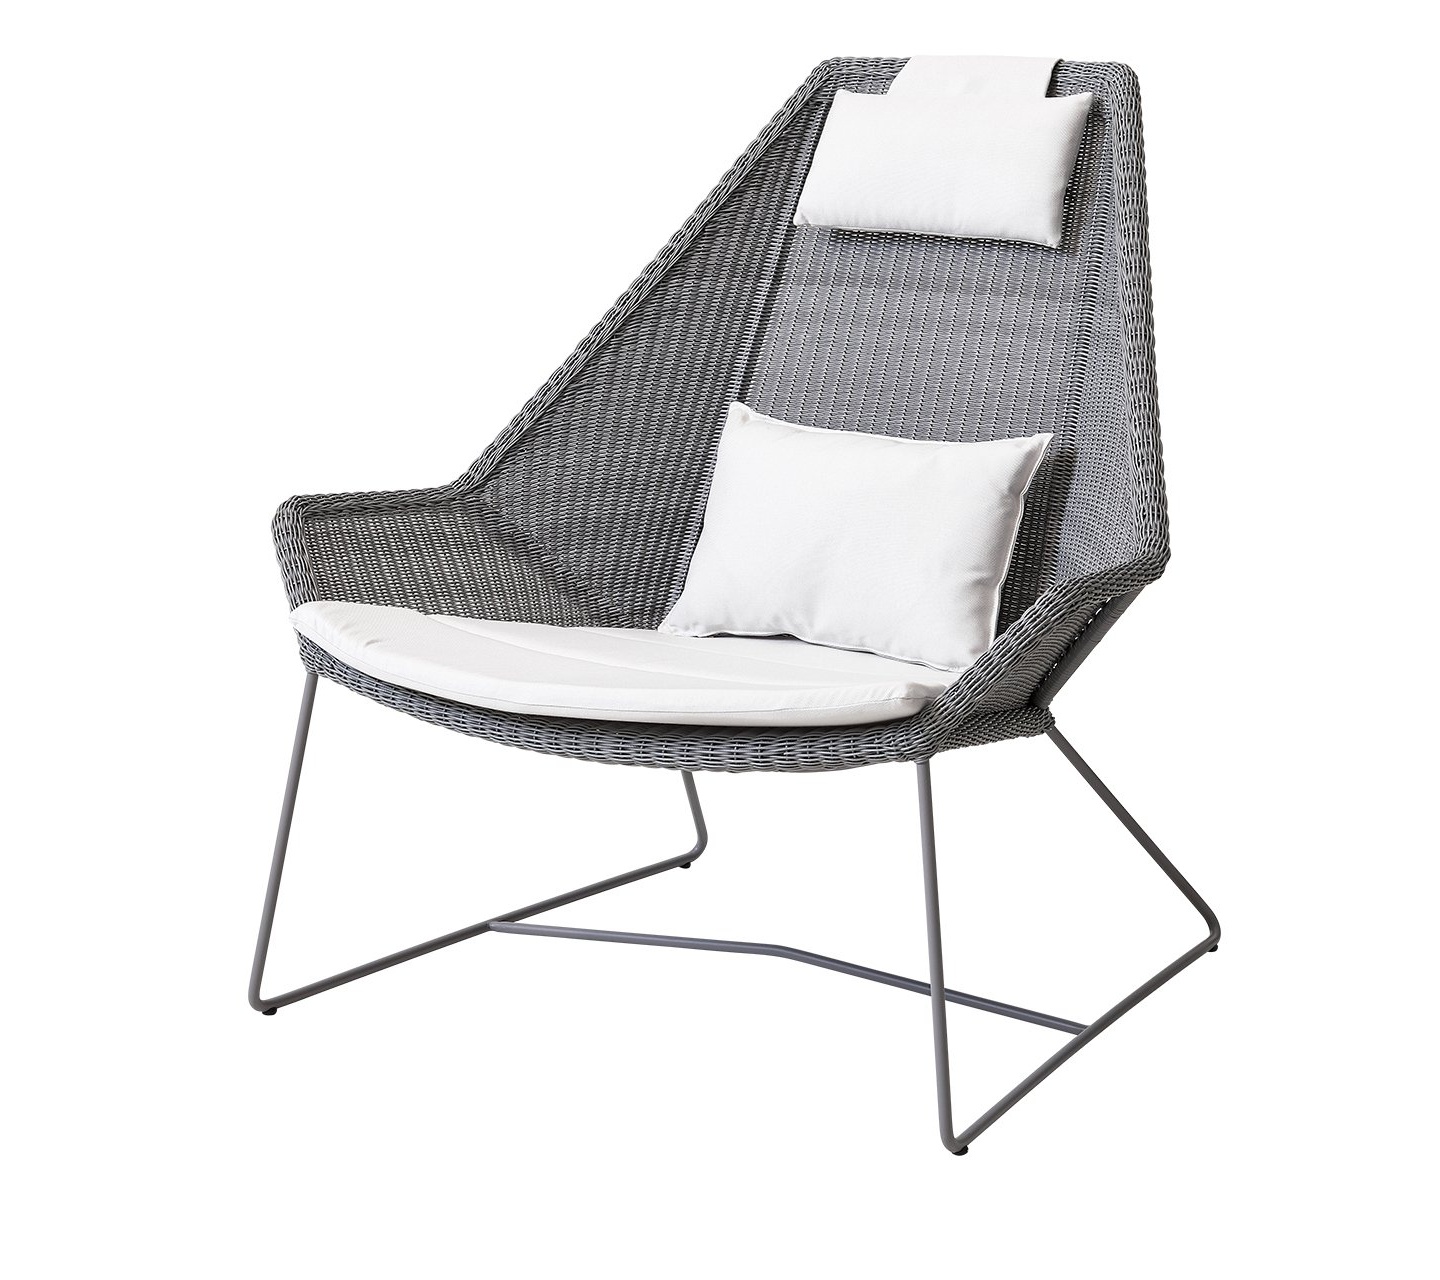 Cane-Line Breeze High Back Outdoor Lounge Chair